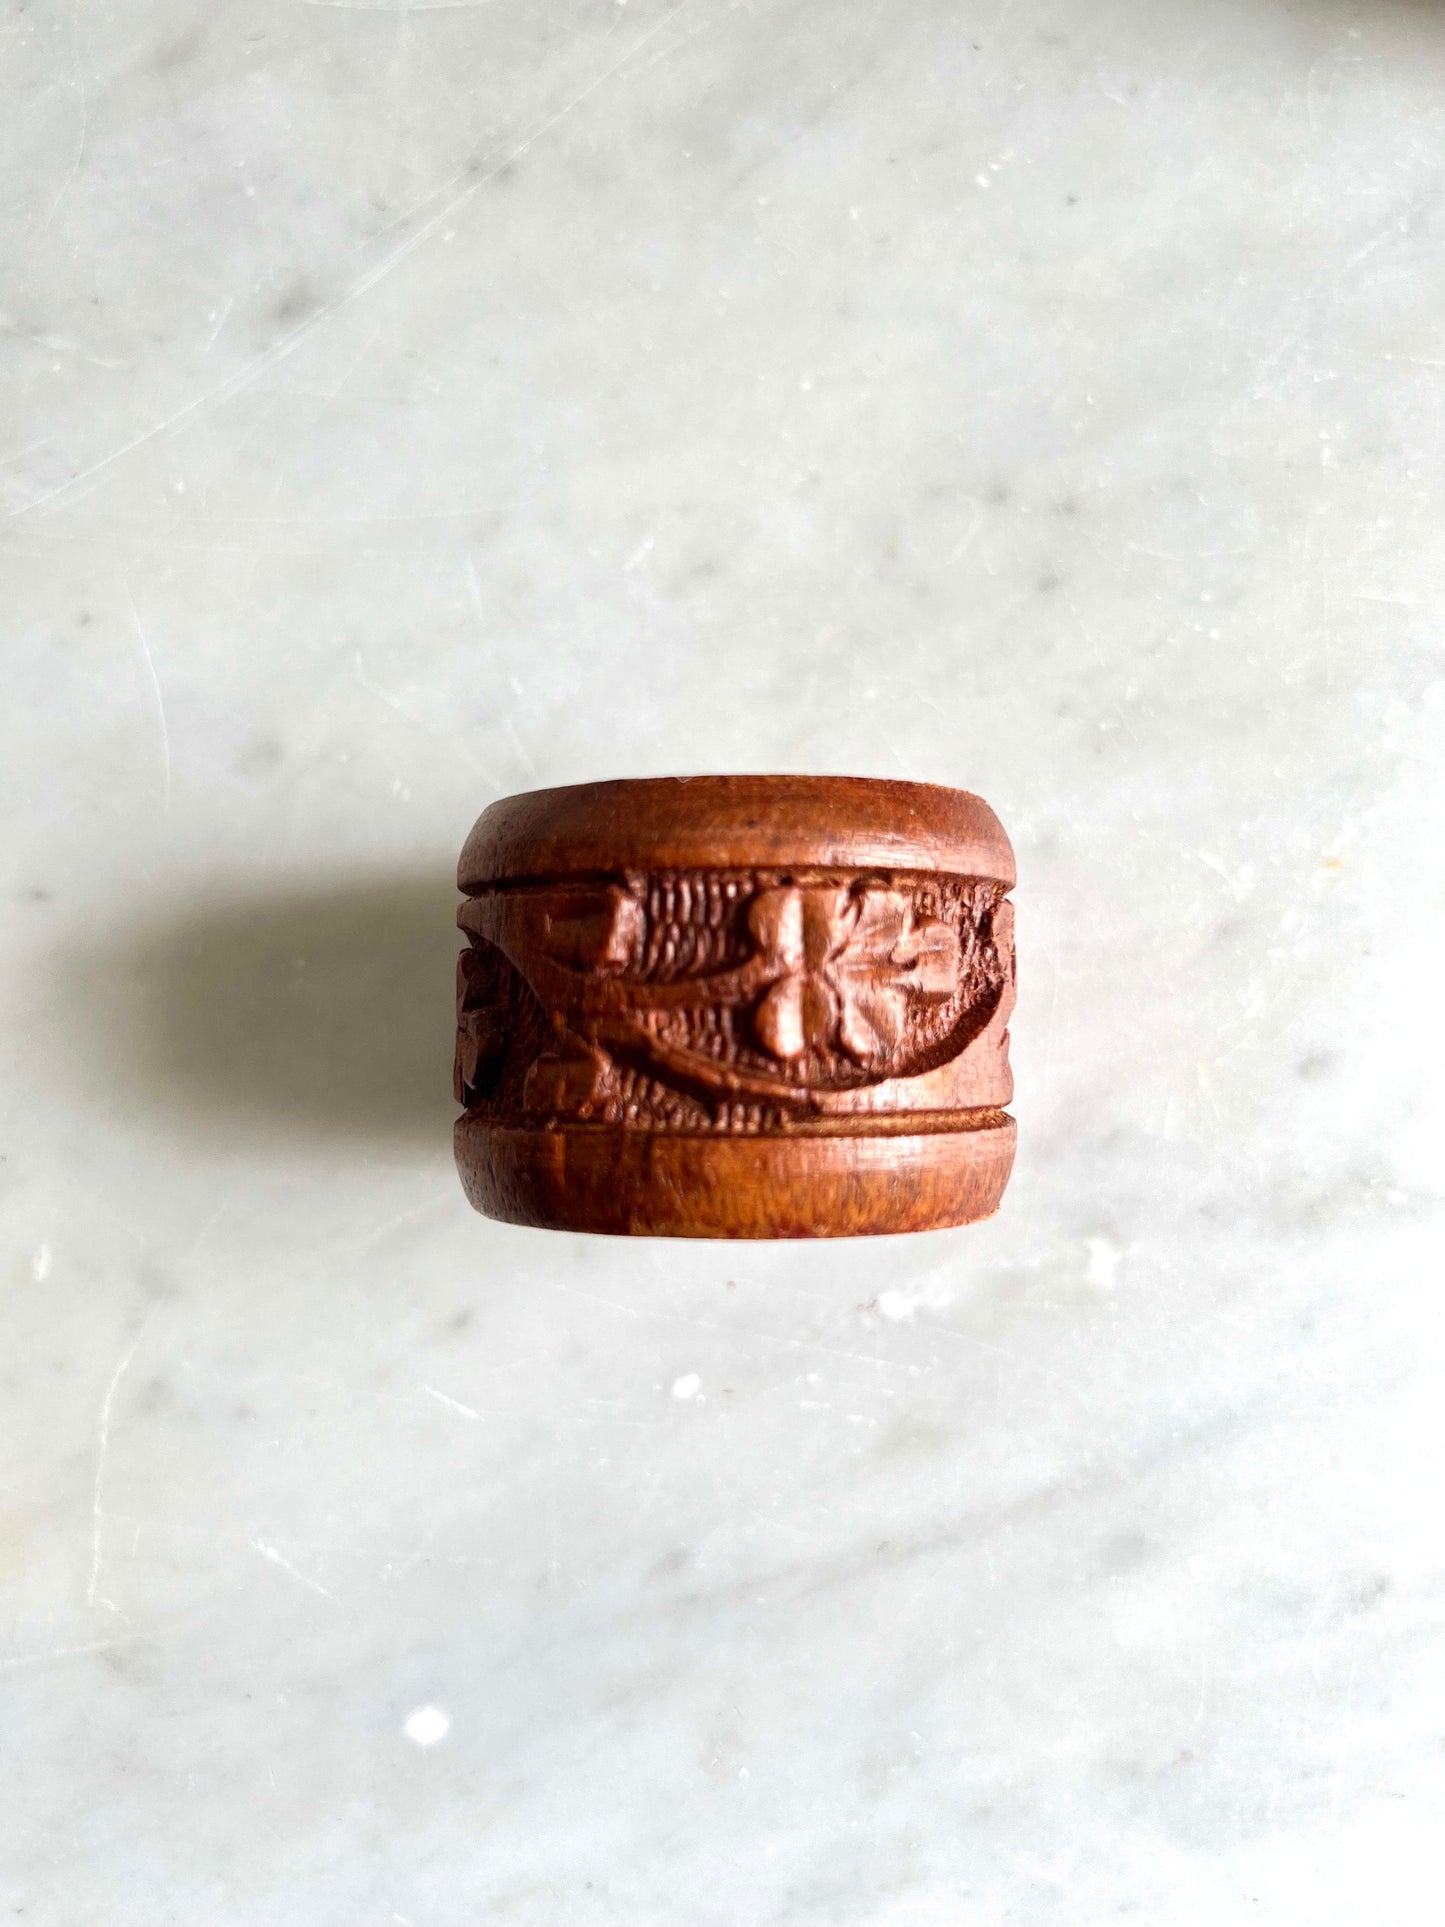 8 Vintage Wooden Napkin Rings Made in India